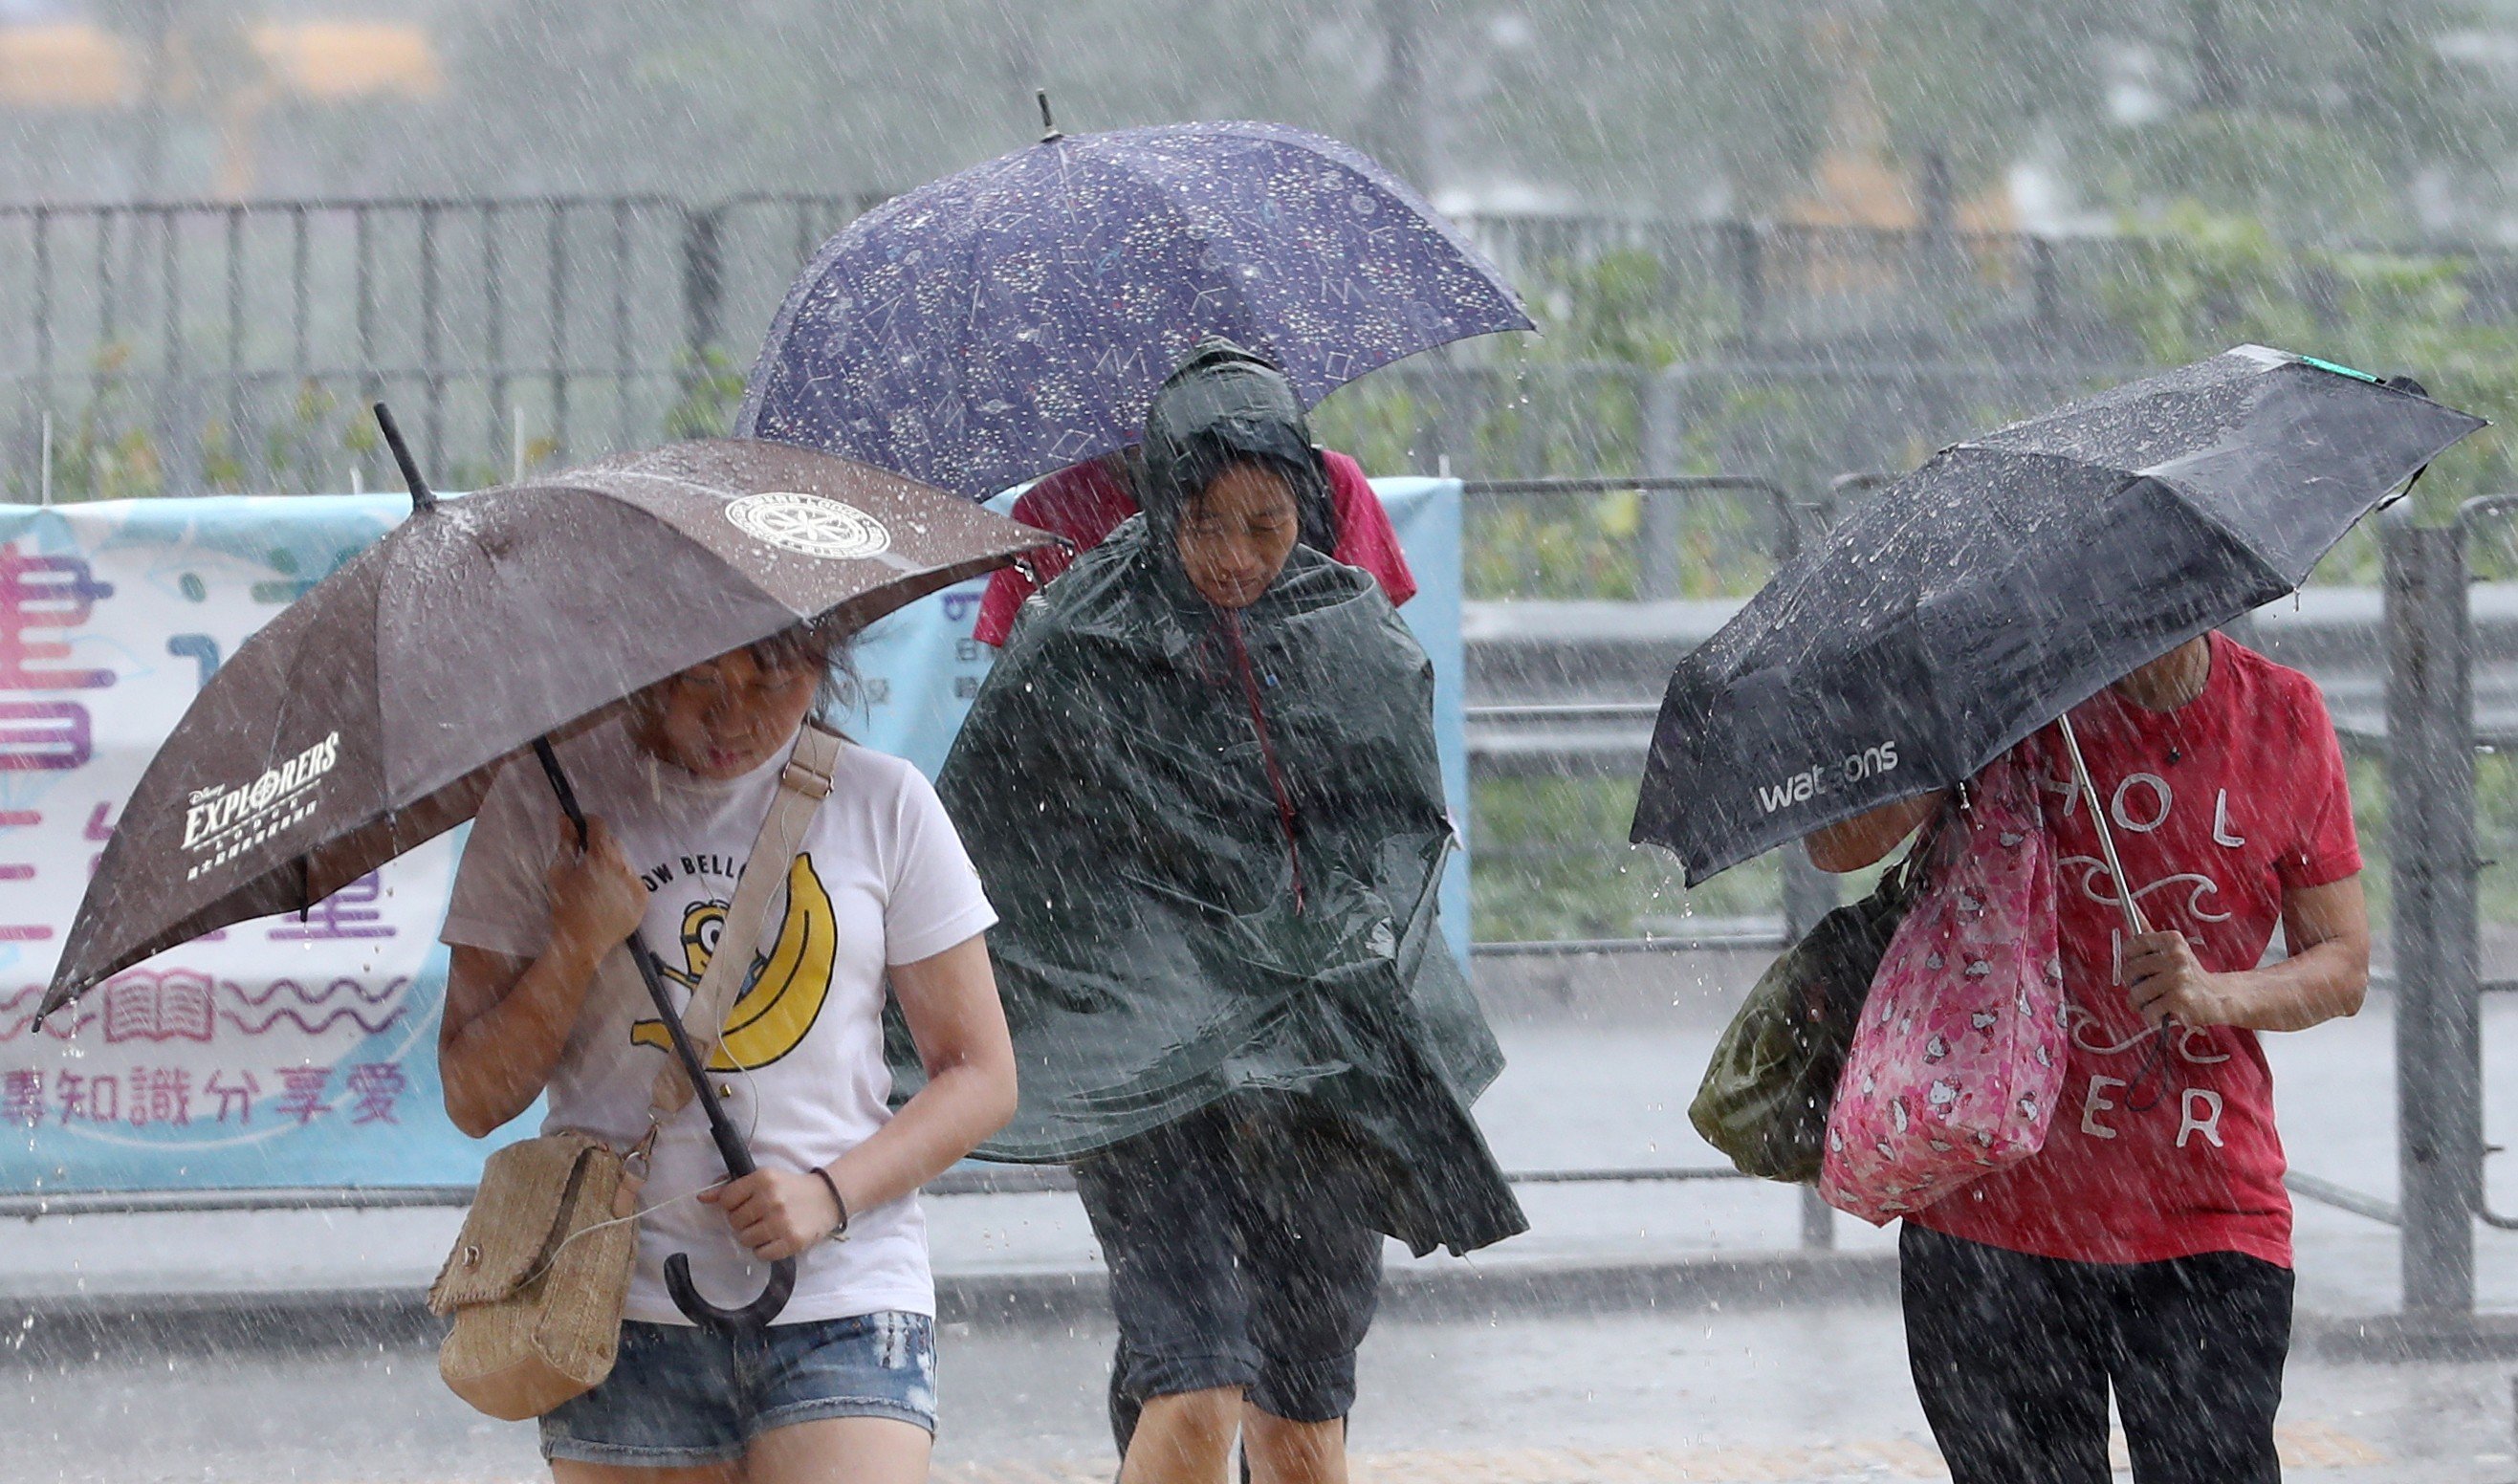 The Hong Kong Observatory issued the amber rainstorm warning signal at 9am on Tuesday. Photo: Nora Tam